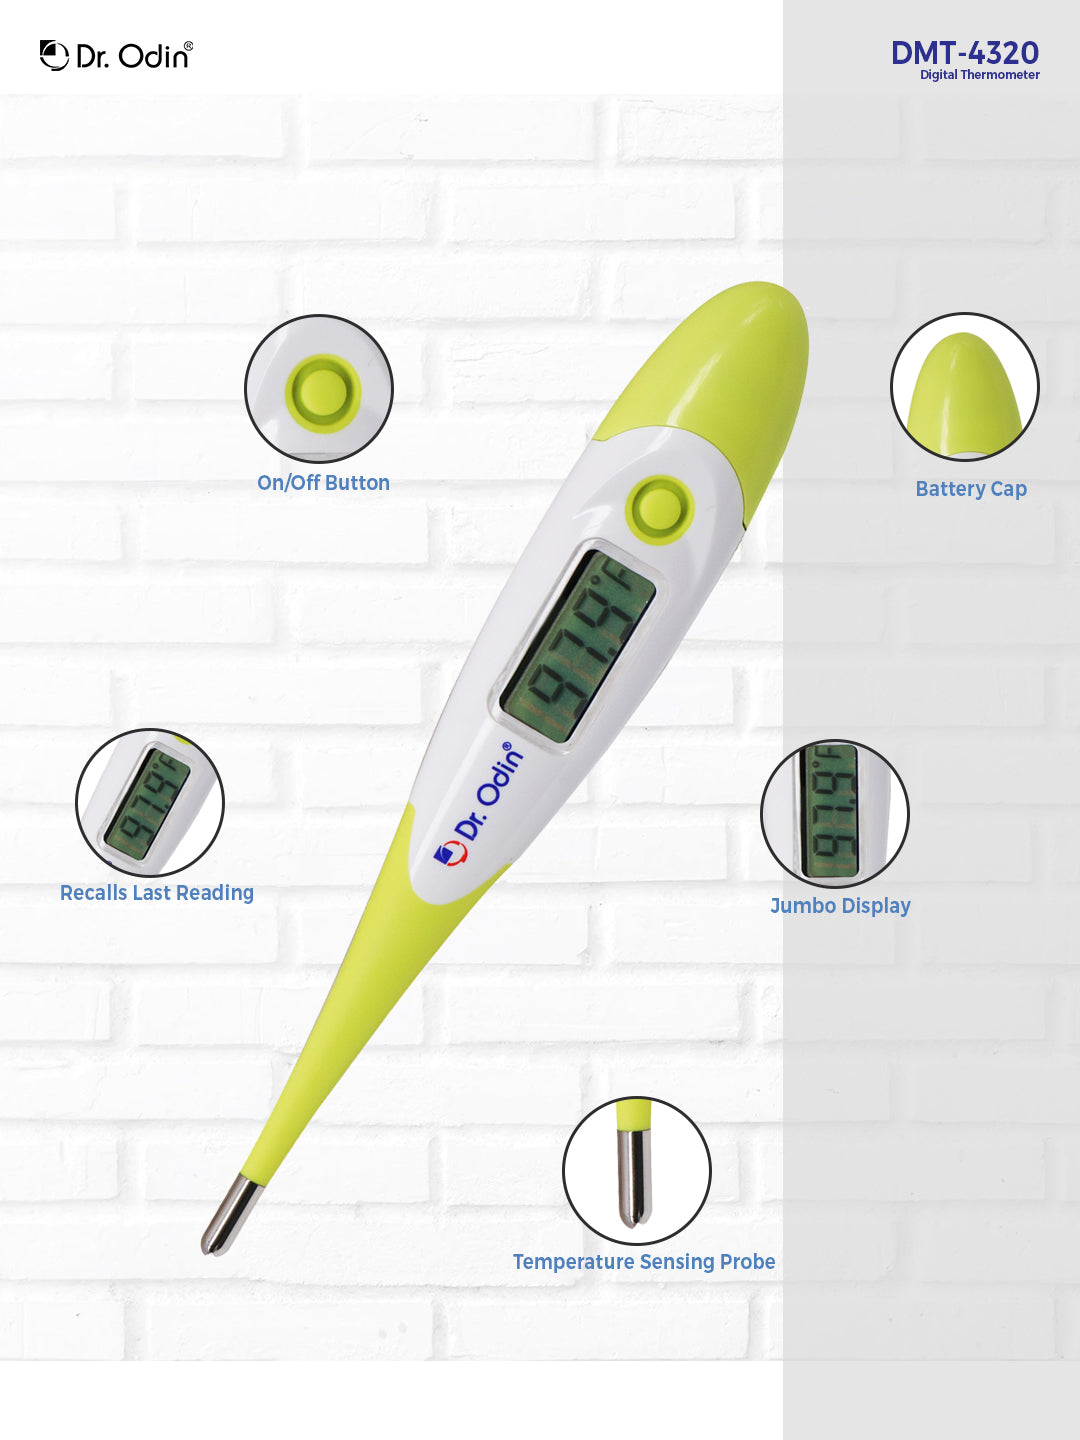 Digital Thermometer DMT4320